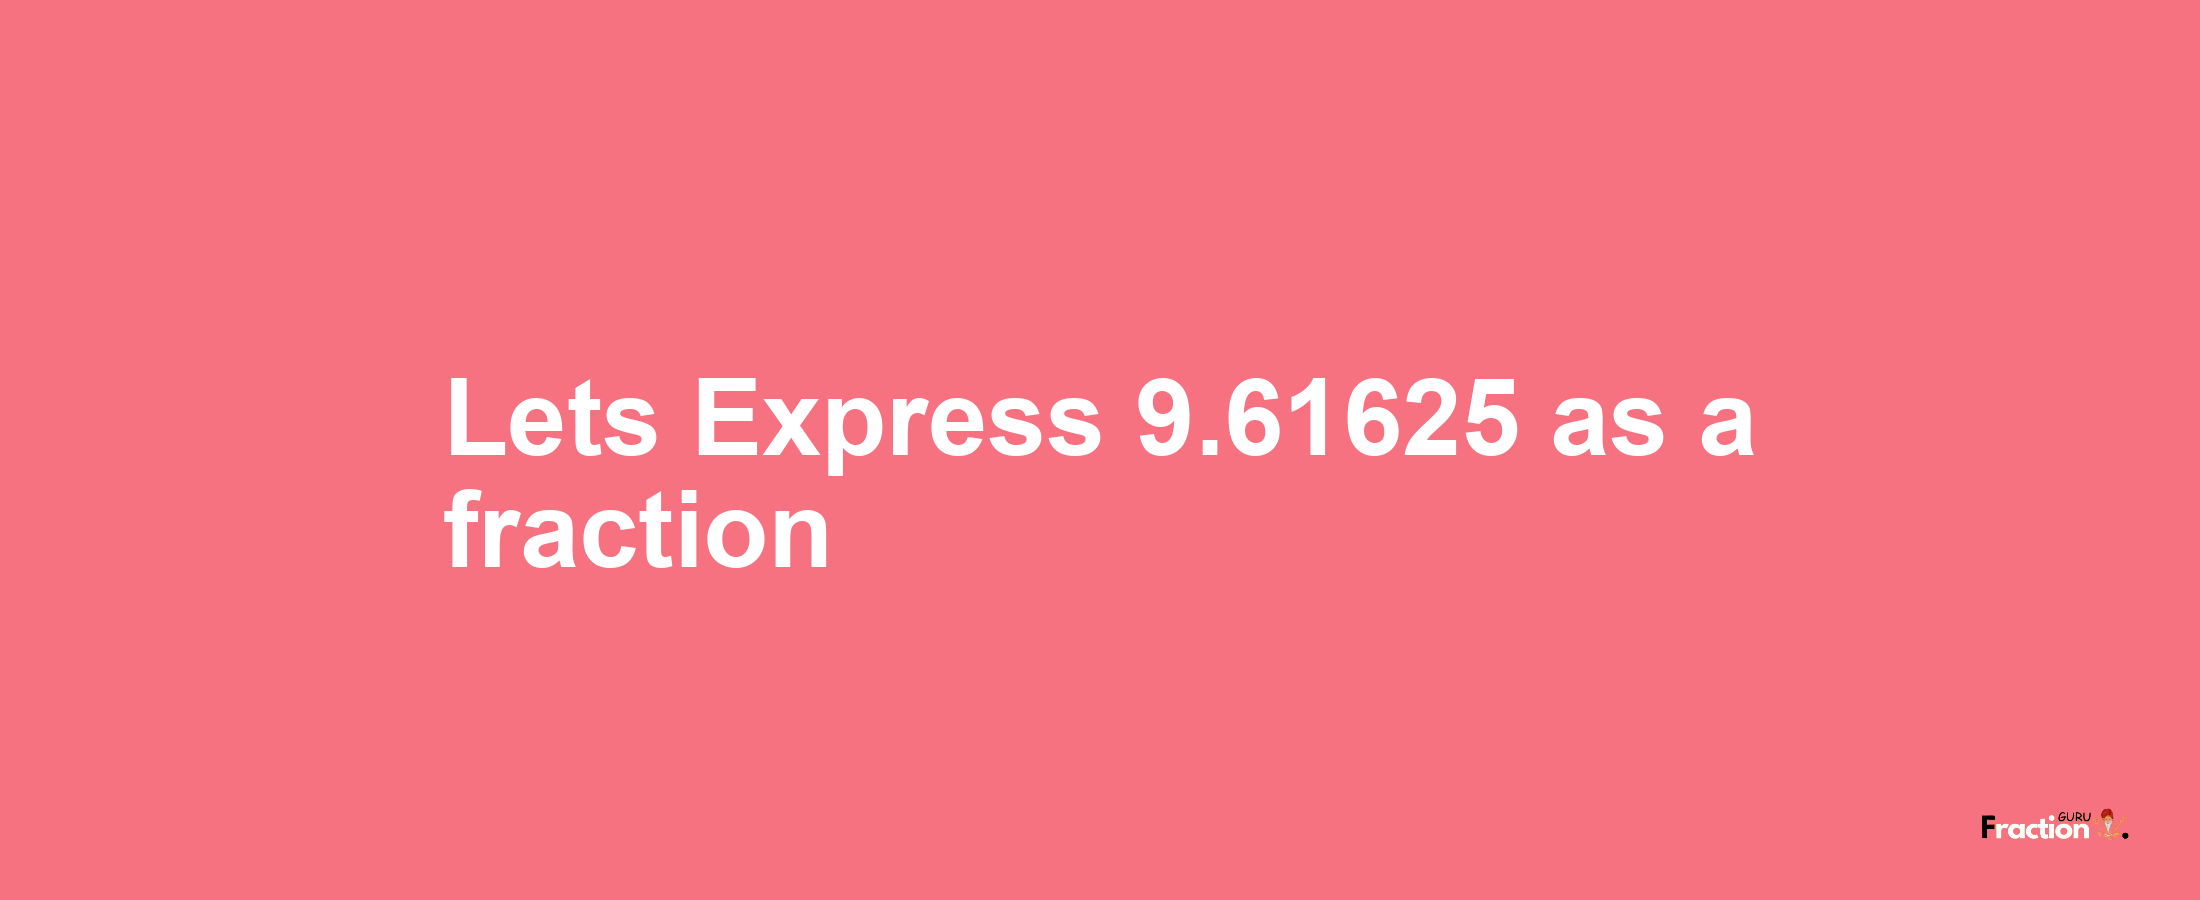 Lets Express 9.61625 as afraction